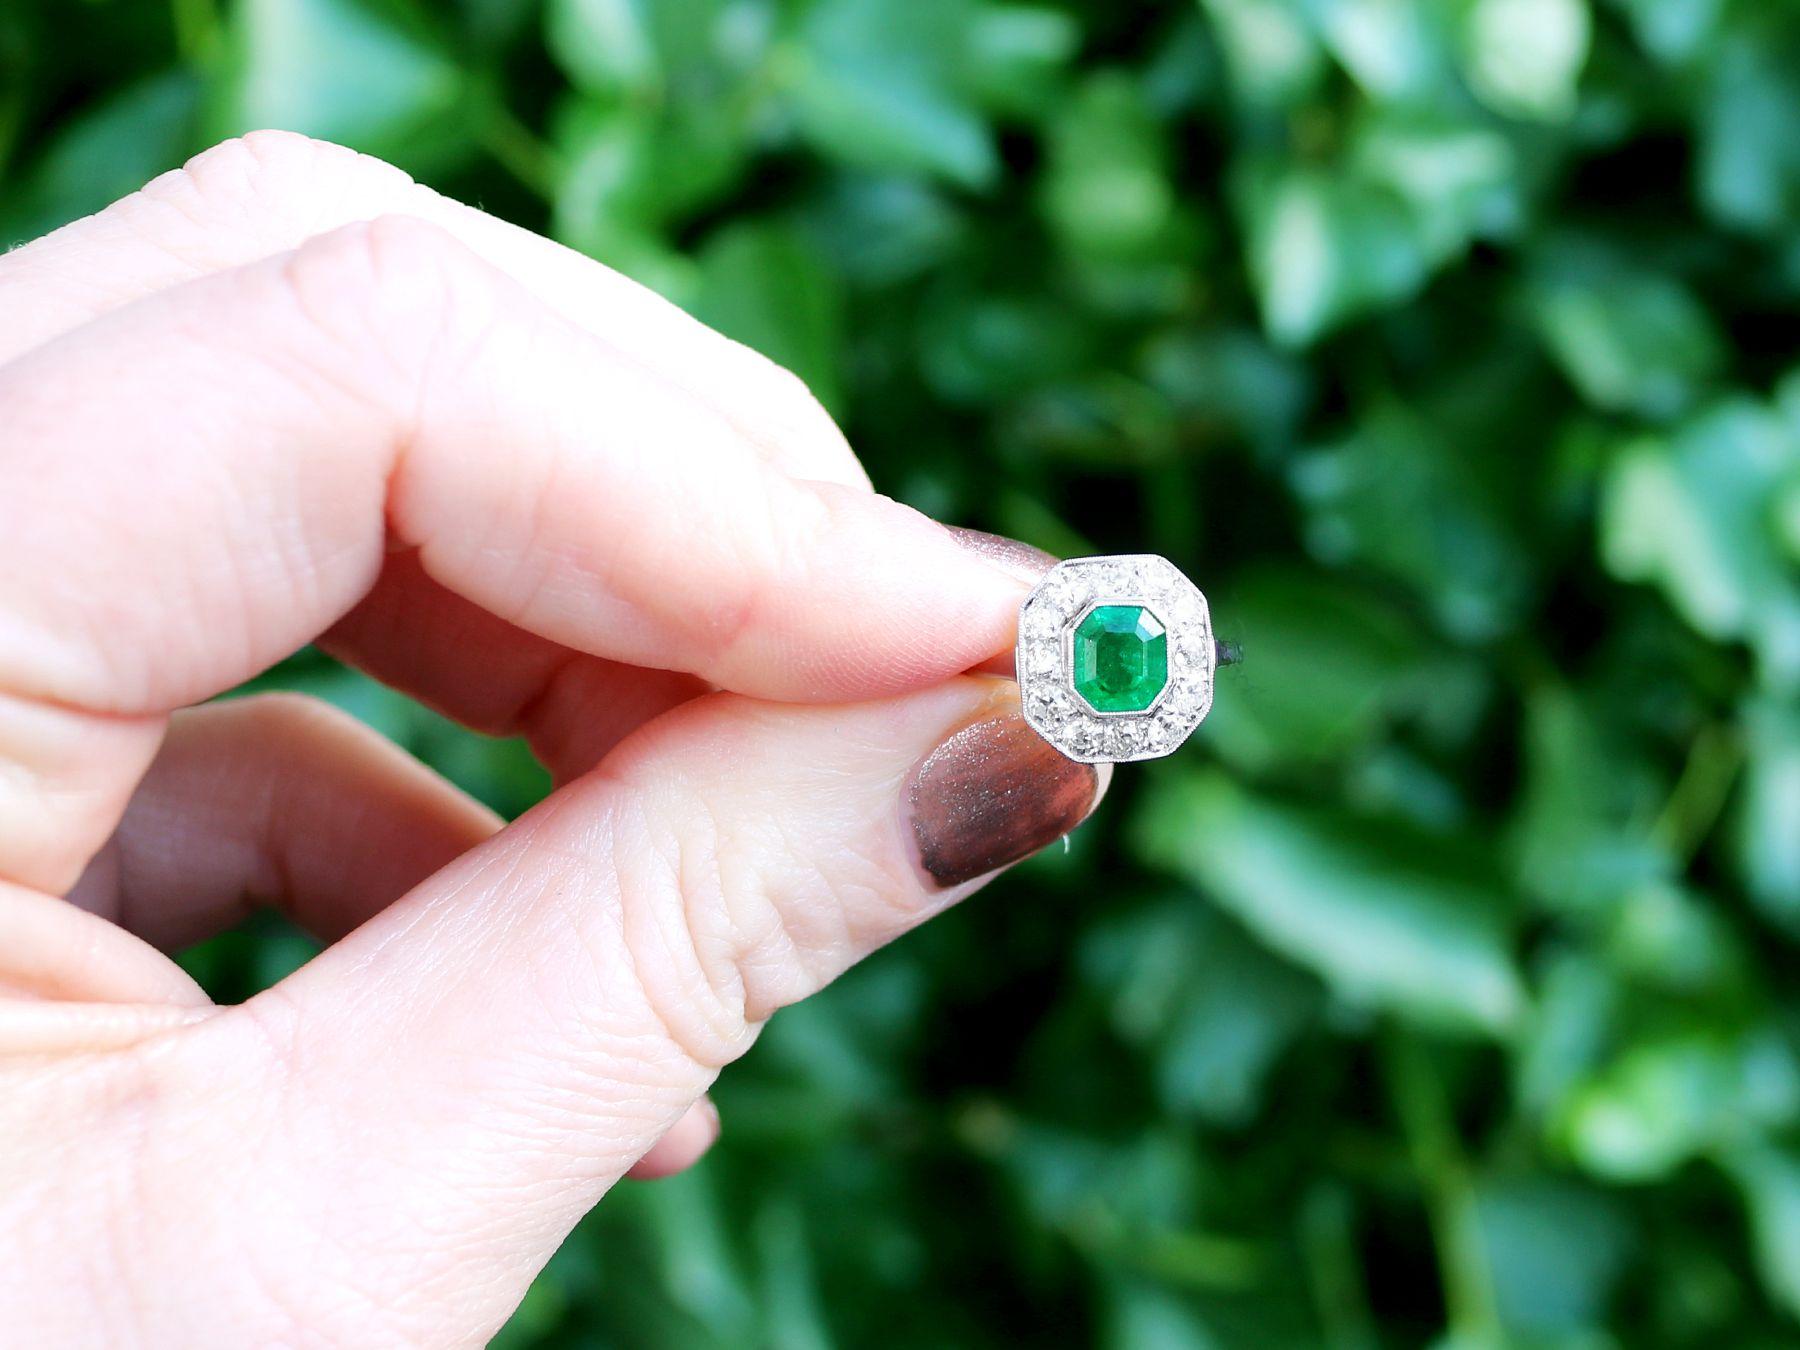 A fine and impressive 0.91 carat emerald and 0.84 carat diamond dress ring crafted in 14 karat white gold; an addition to our antique jewelry collections.

This fine and impressive antique emerald ring has been crafted in 14k white gold.

The